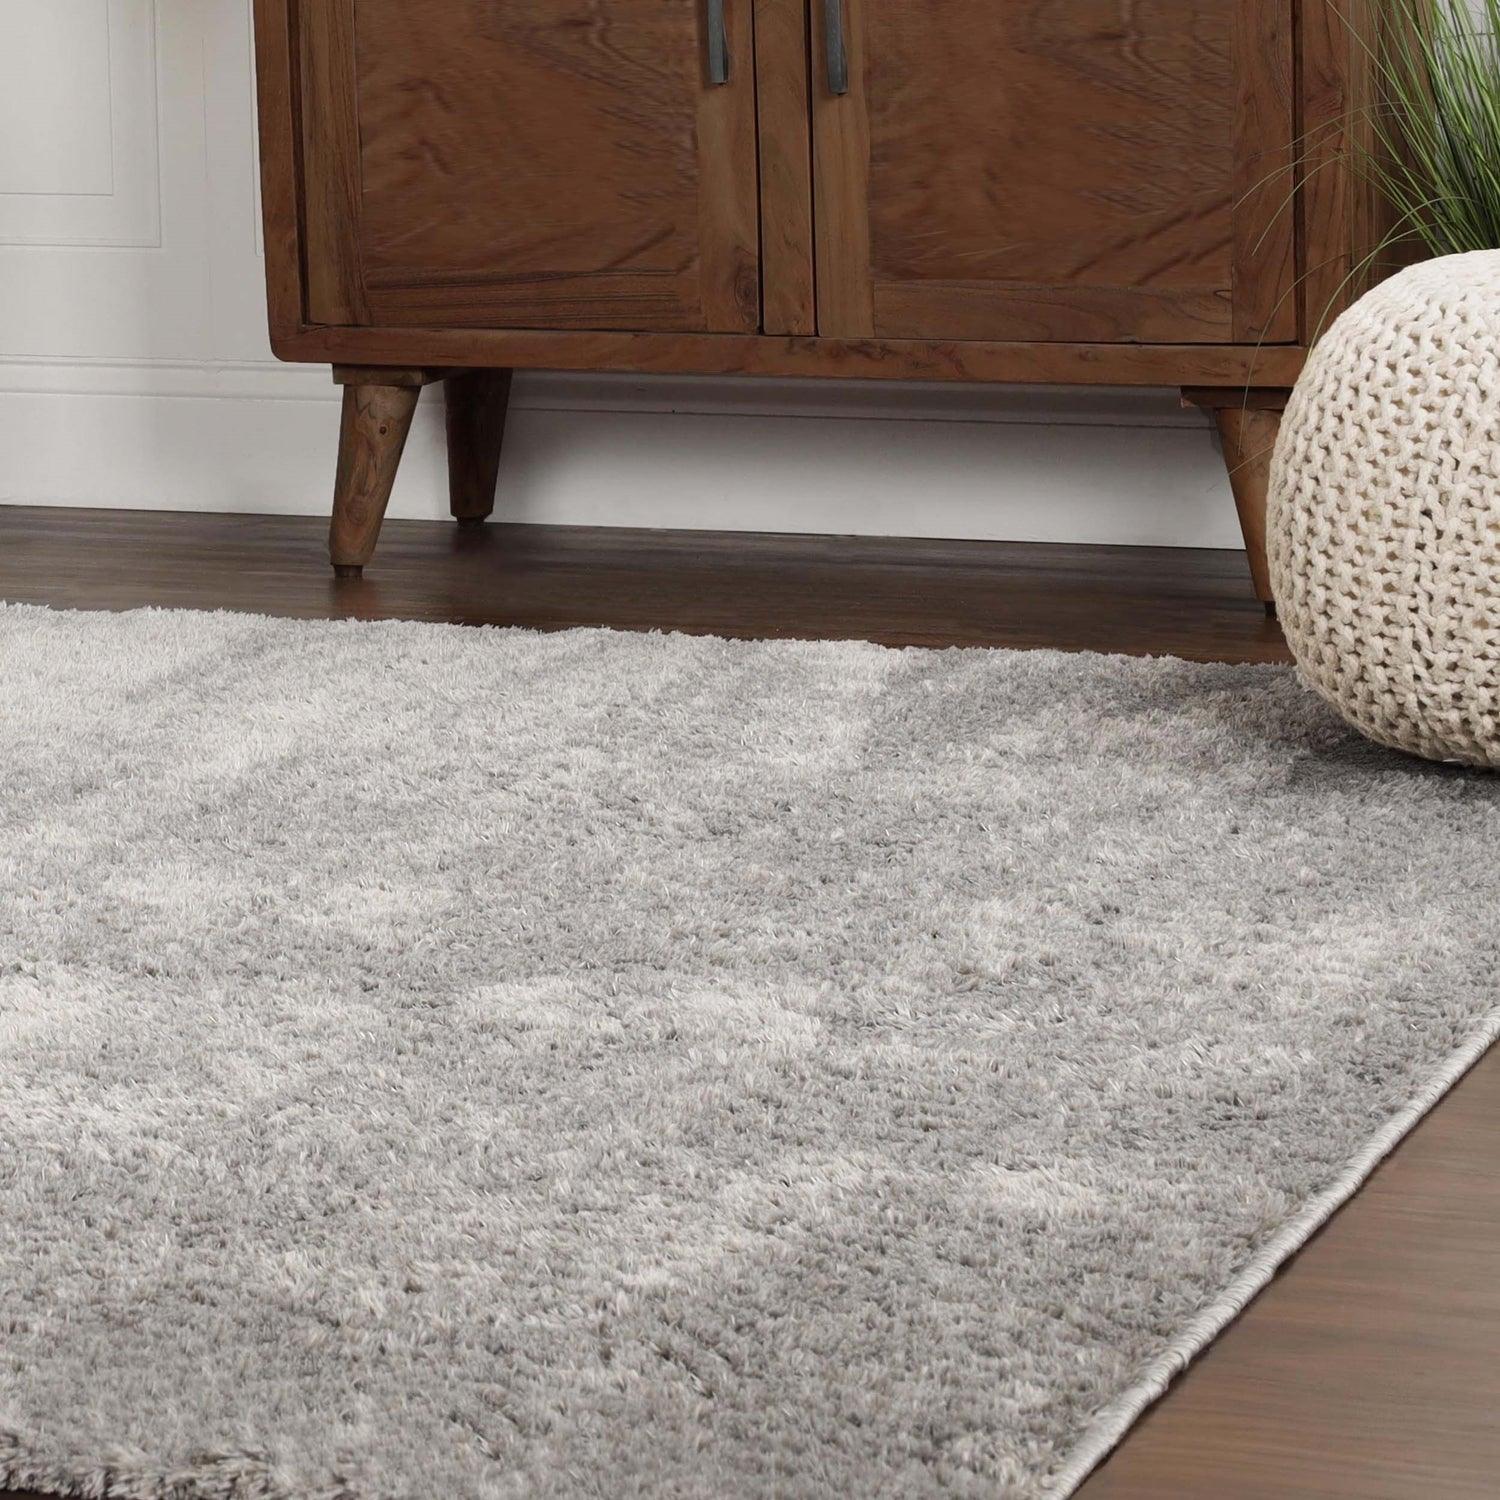  Superior Fuzzy Plush Non-Skid Soft Solid Shag Indoor Area Rug or Runner - Silver